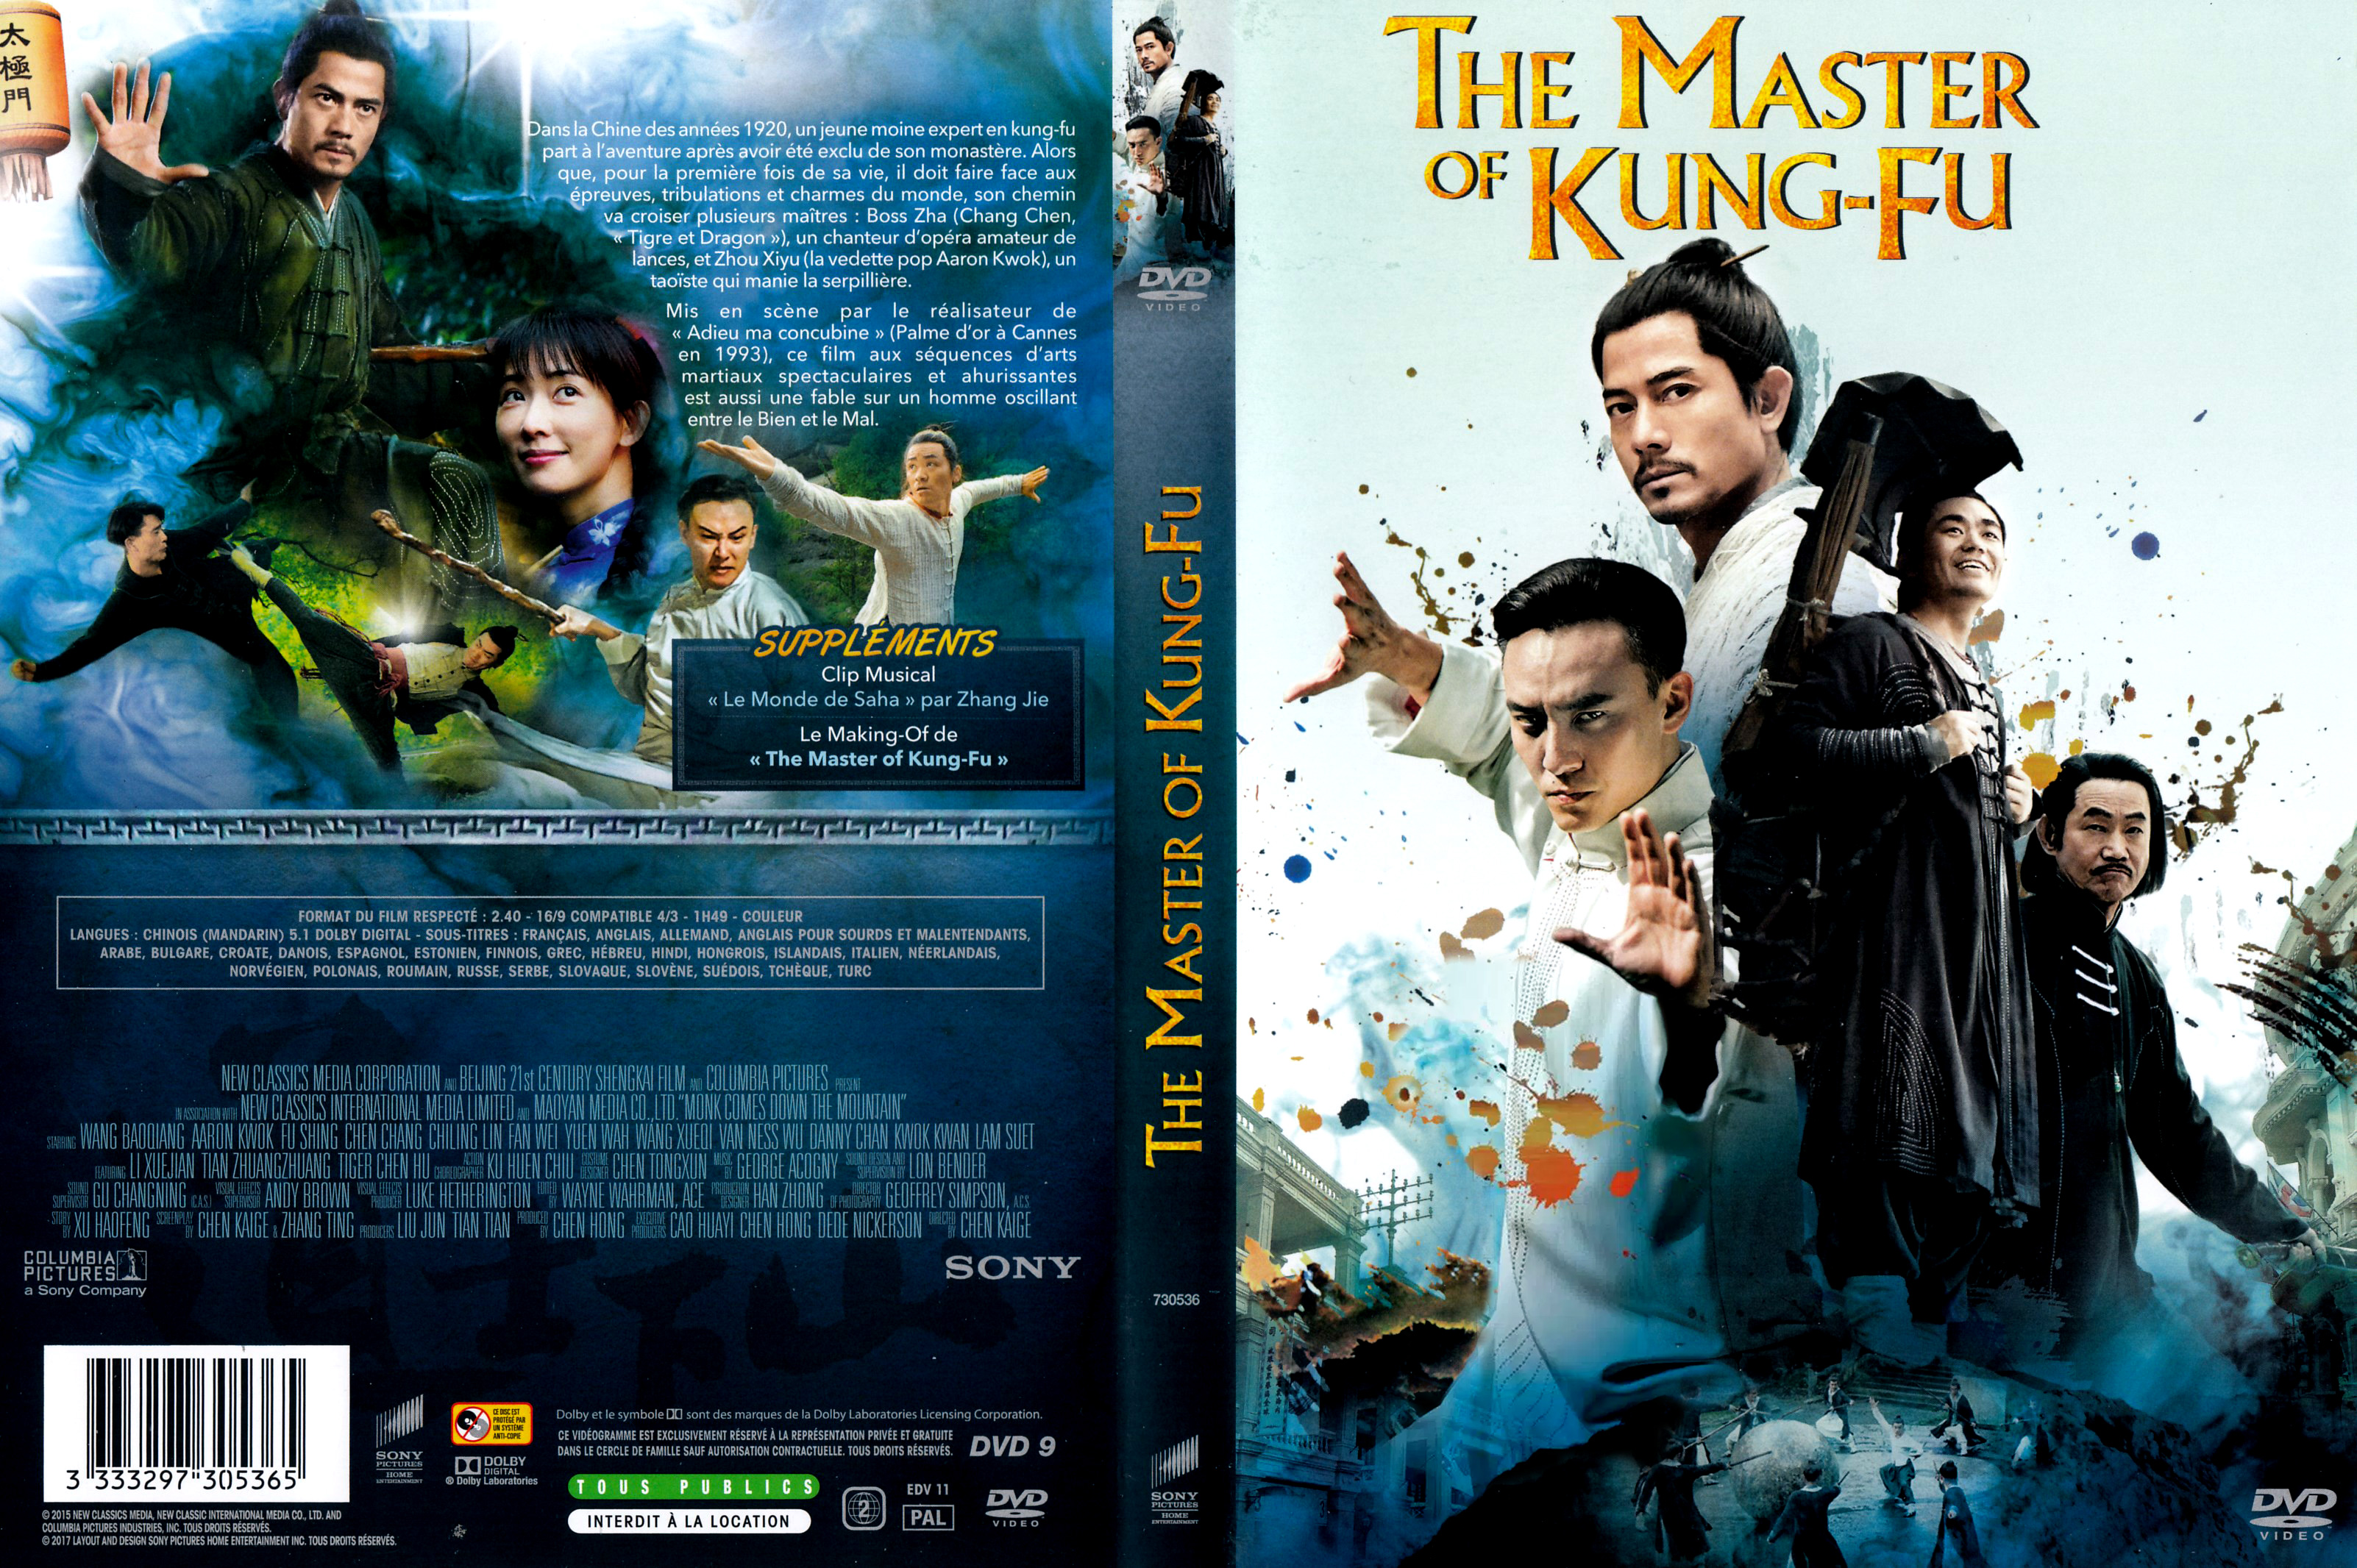 Jaquette DVD The master of kung-fu